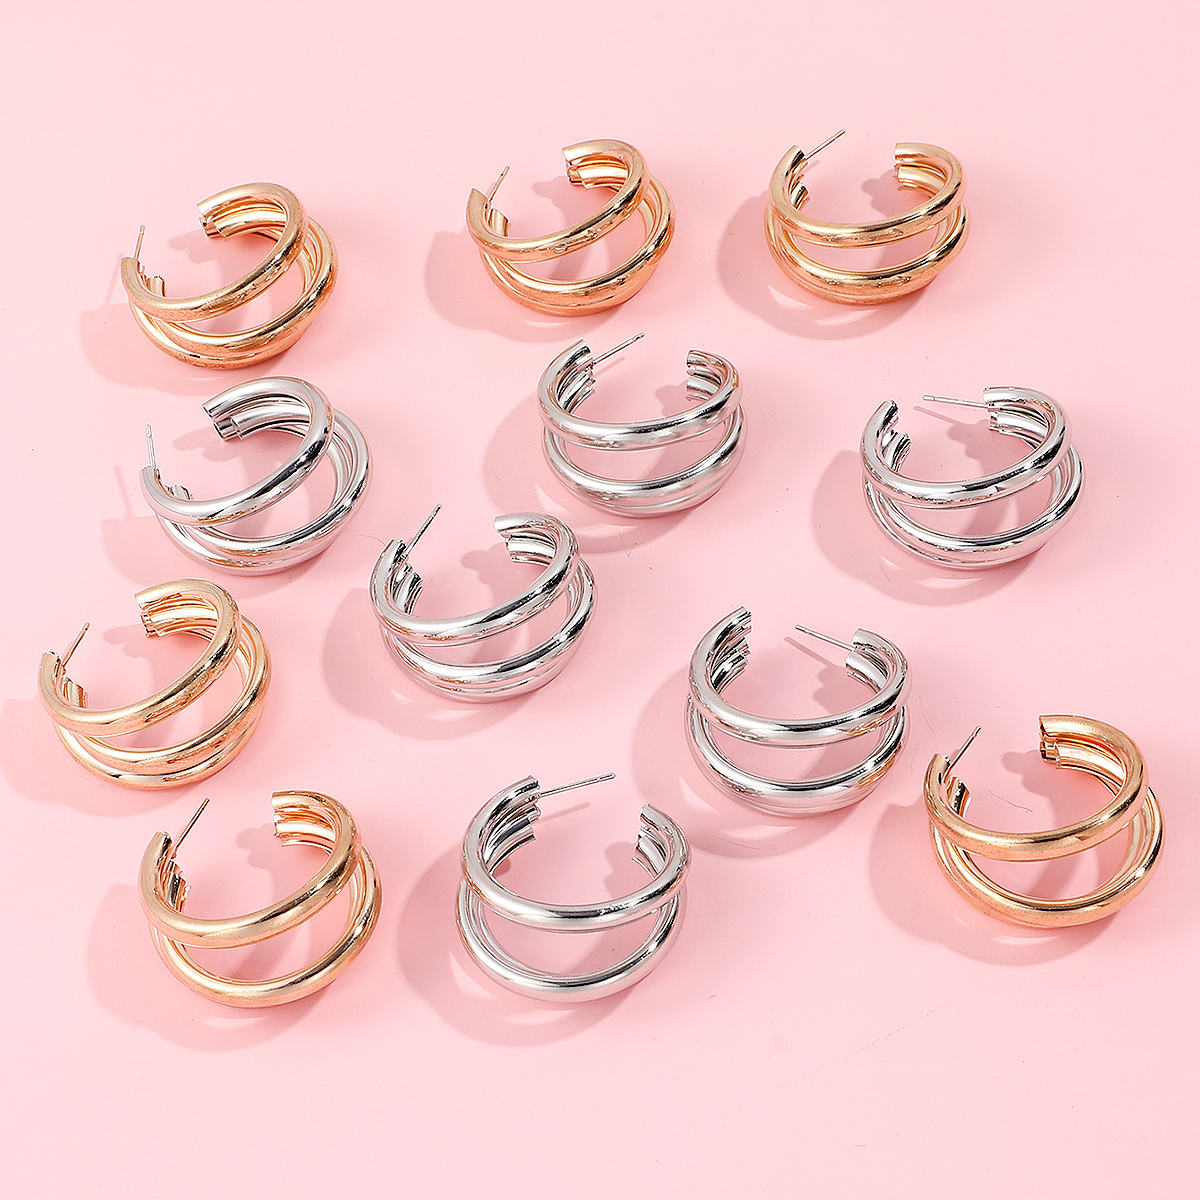 6 pairs of gold and silver alloy hoop earrings setpicture3